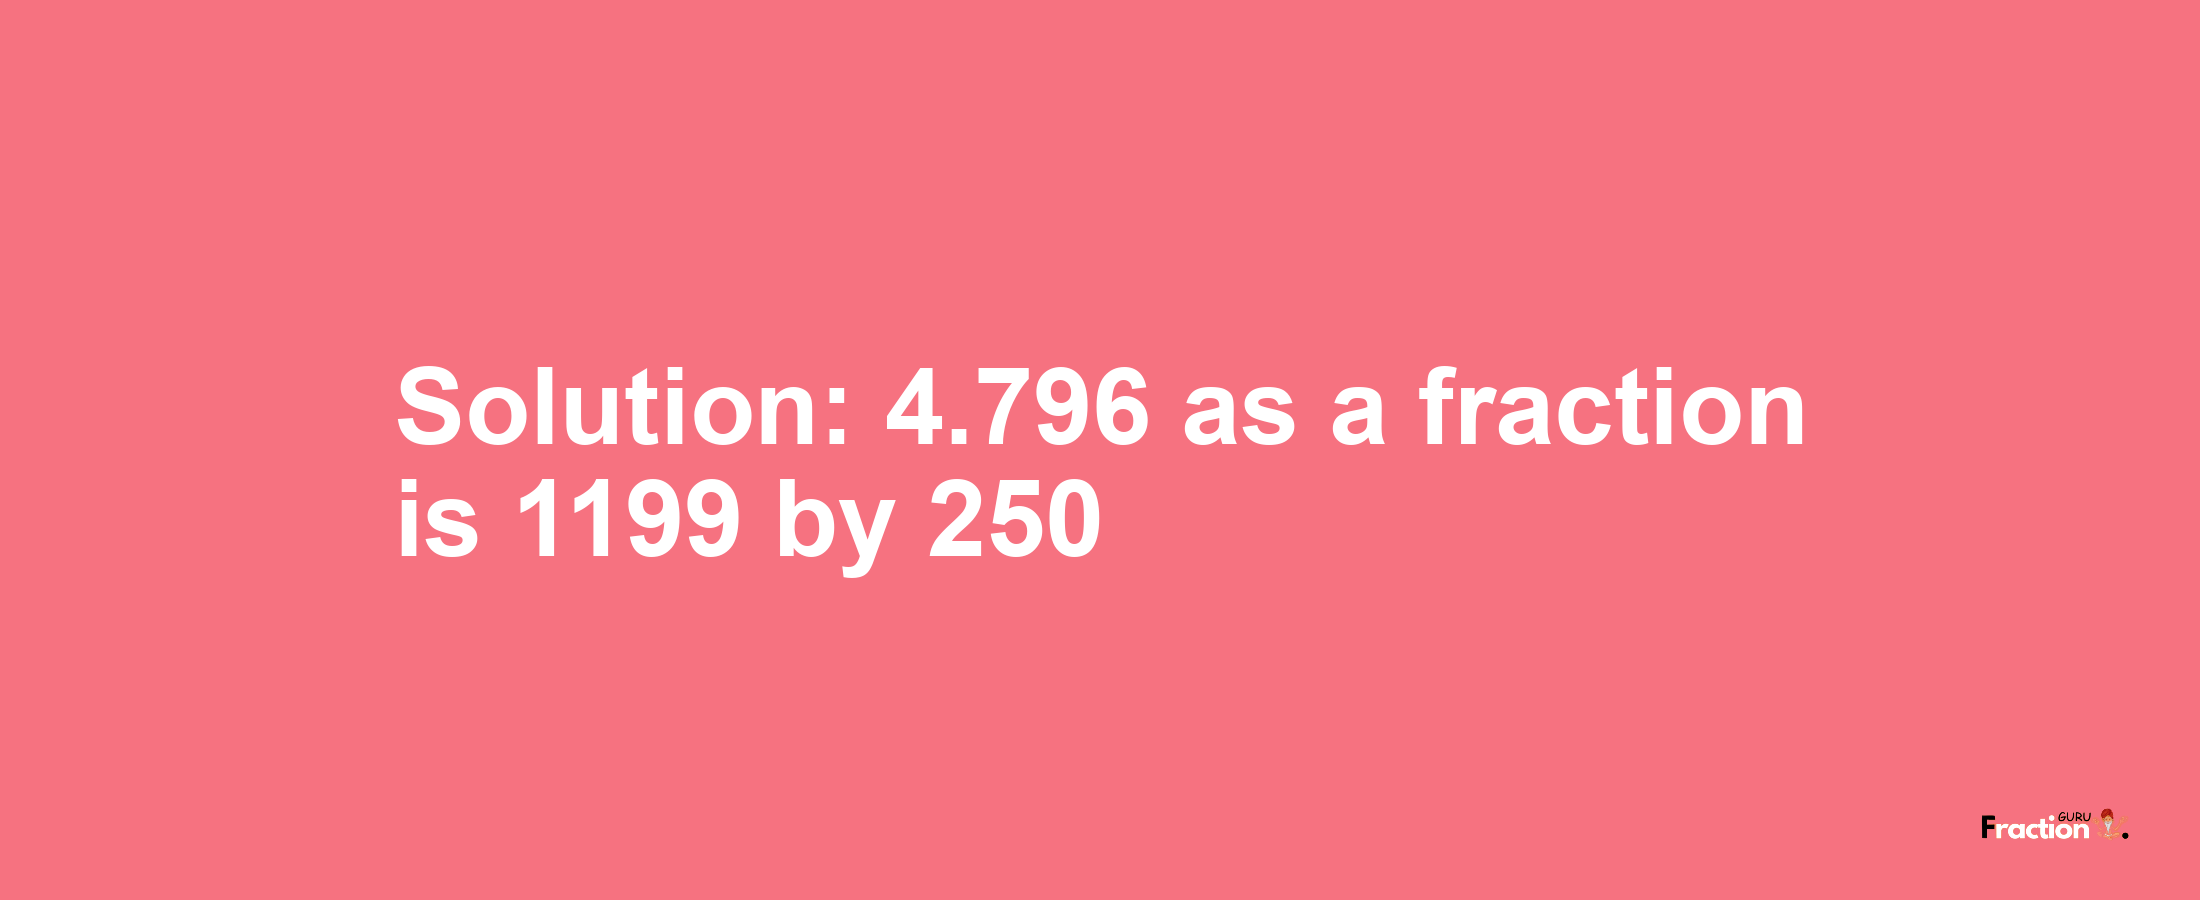 Solution:4.796 as a fraction is 1199/250